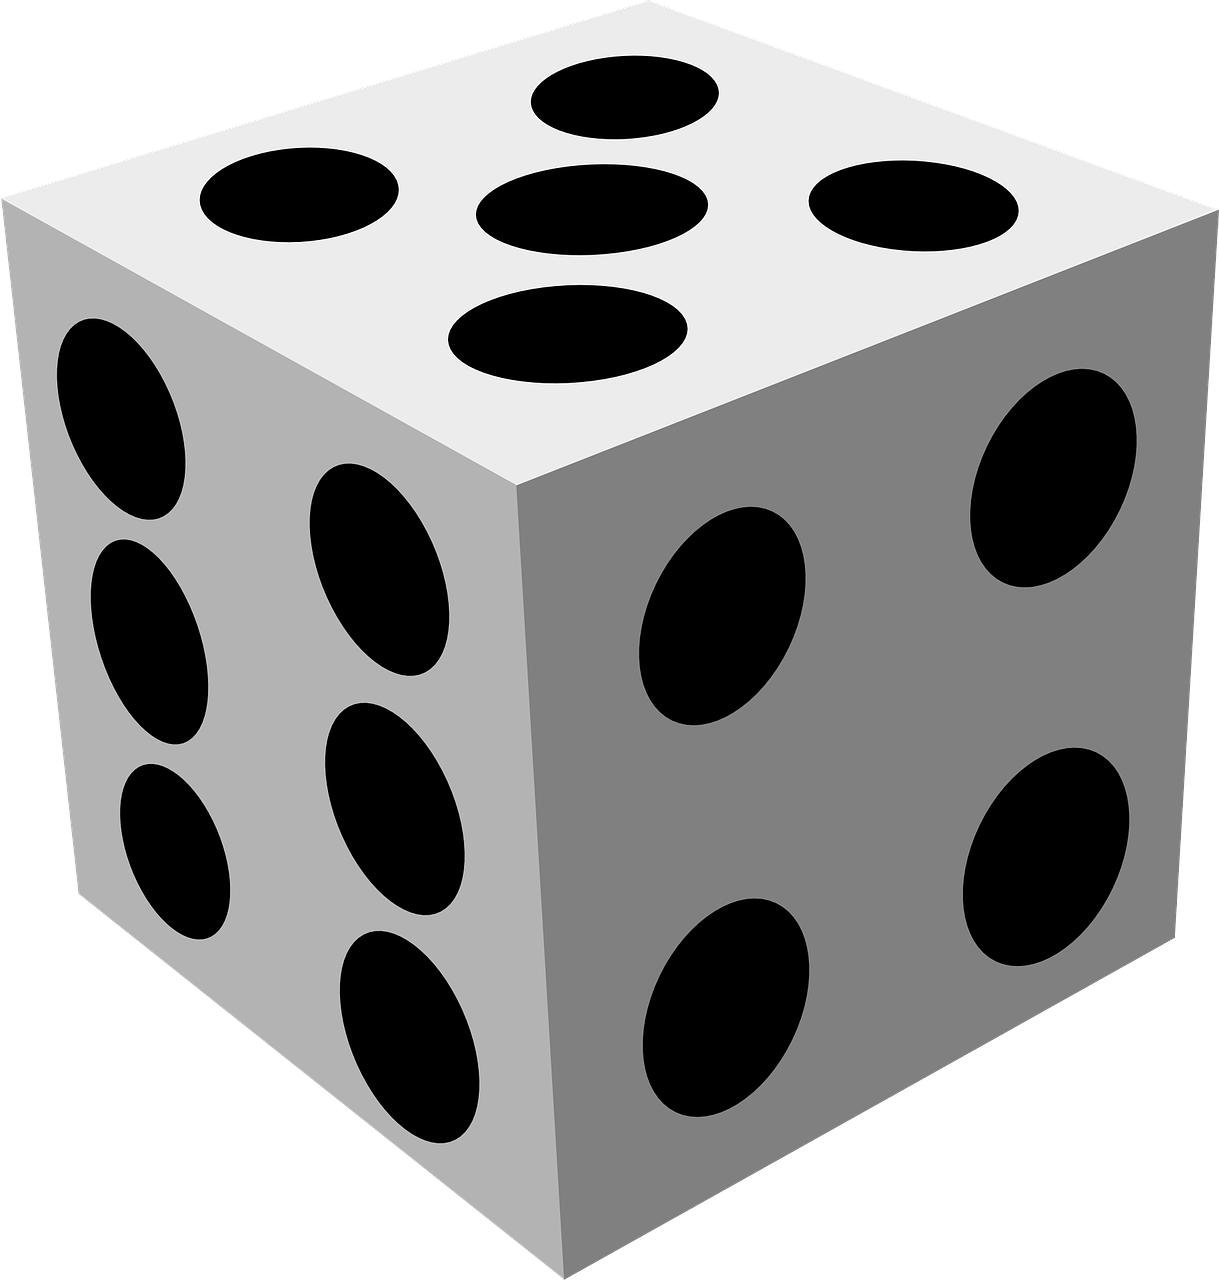 a white dice with black dots on it, a raytraced image, pixabay, optical illusion, black 3 d cuboid device, tabletop game board, rice, isometry